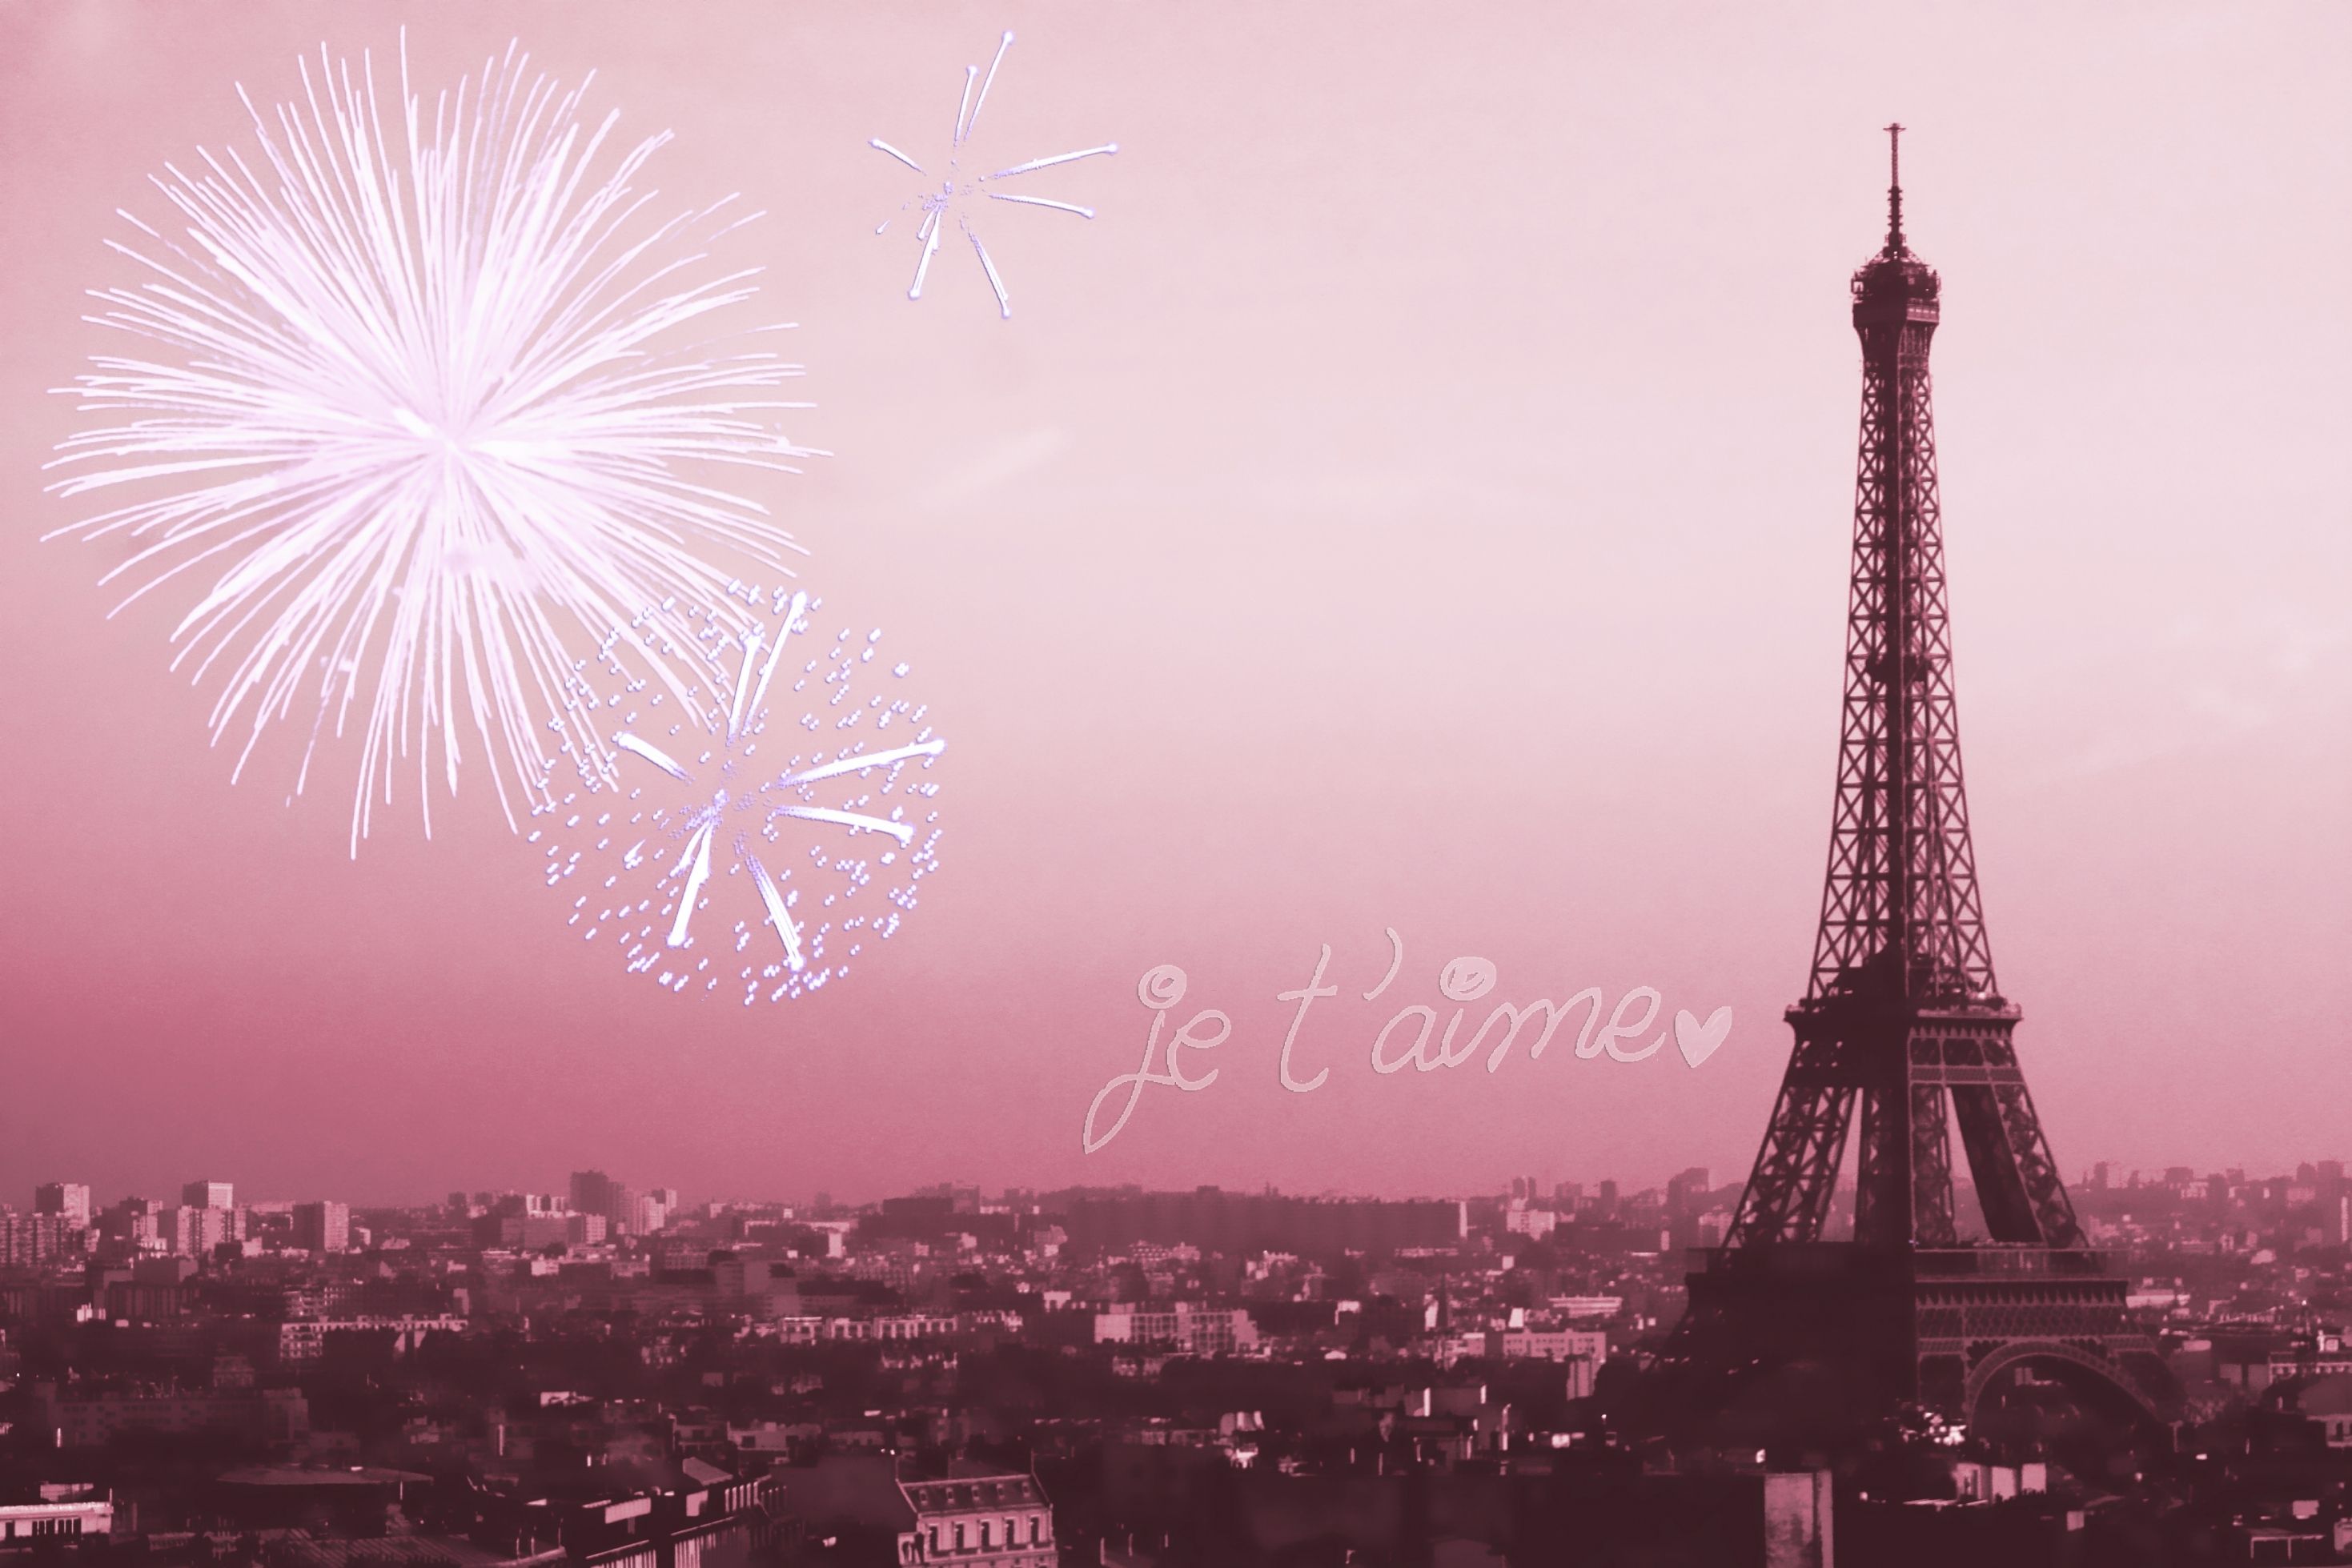 Pink and white photograph of the Eiffel Tower with fireworks in the sky - Paris, Eiffel Tower